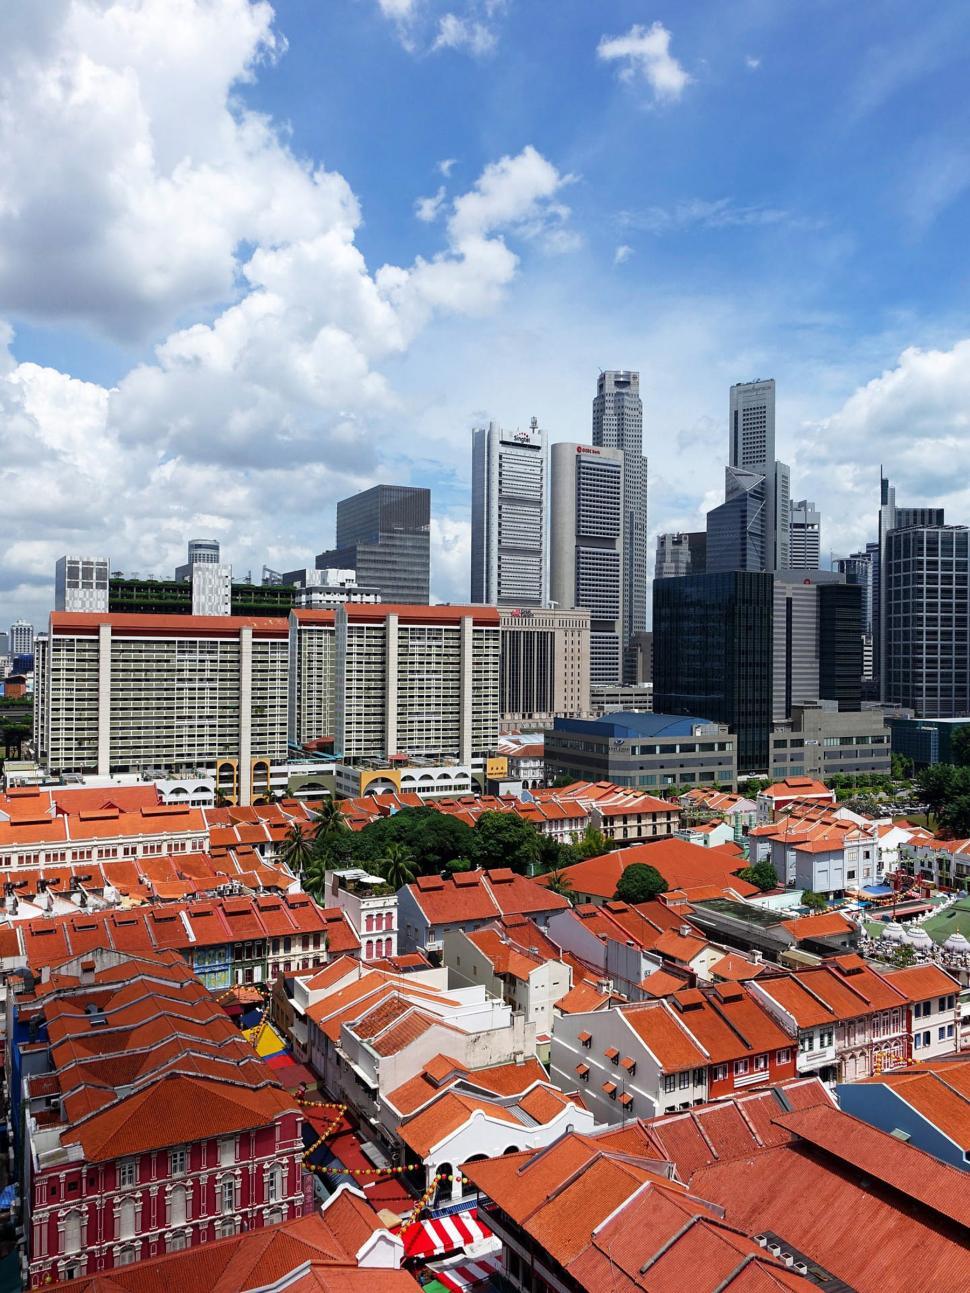 Free Image of Panoramic View of a City Skyline With Tall Buildings 